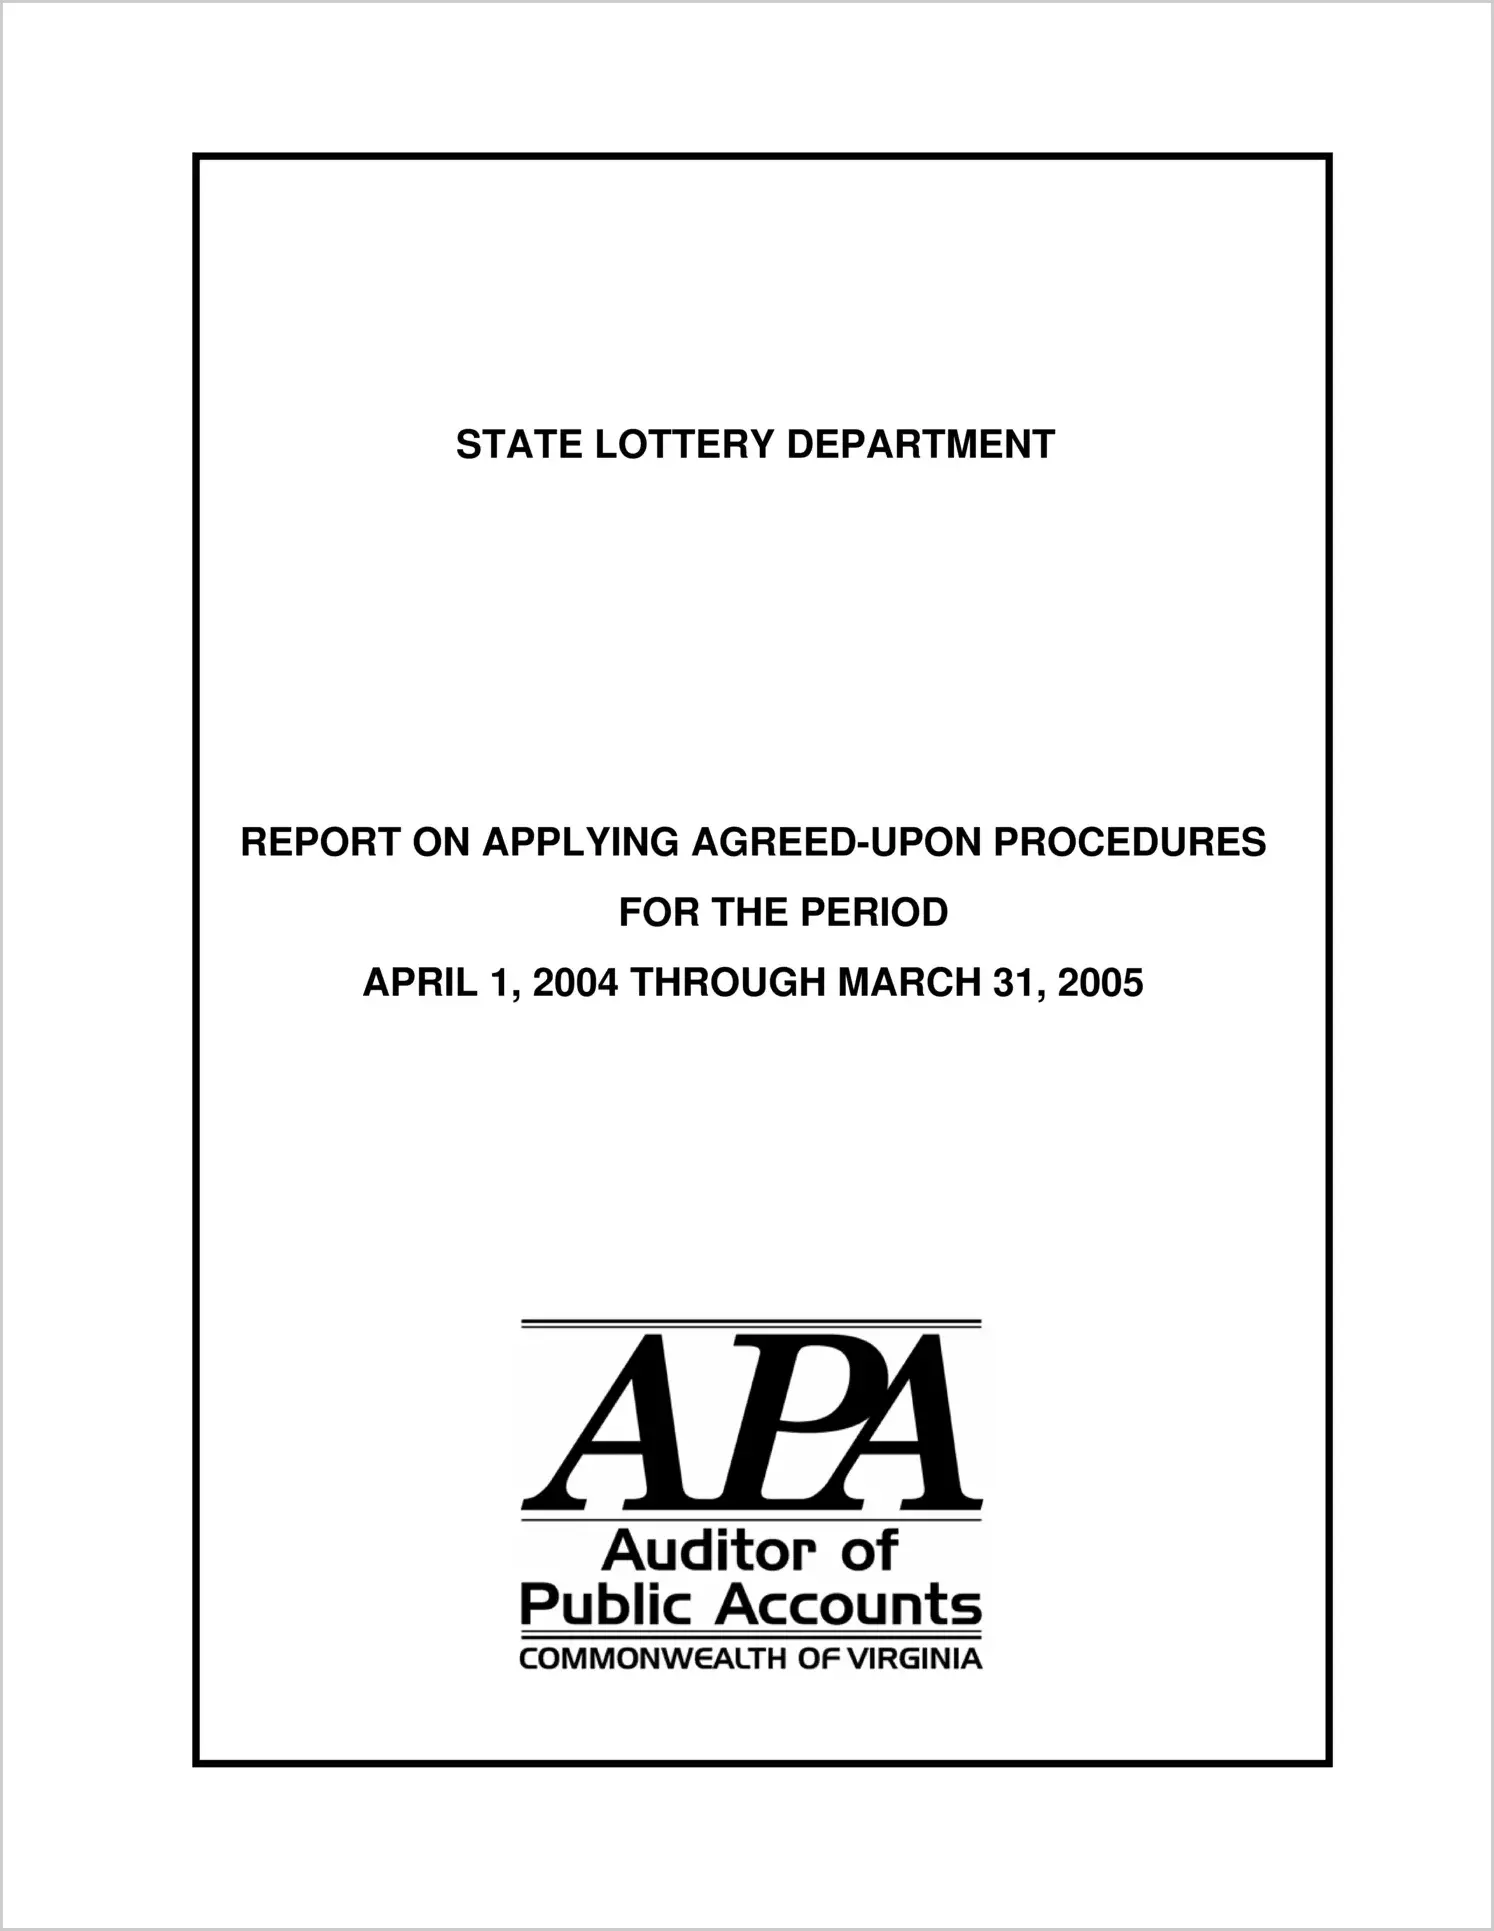 State Lottery Department Report on Applying Agreed-Upon Procedures (Lotto South)